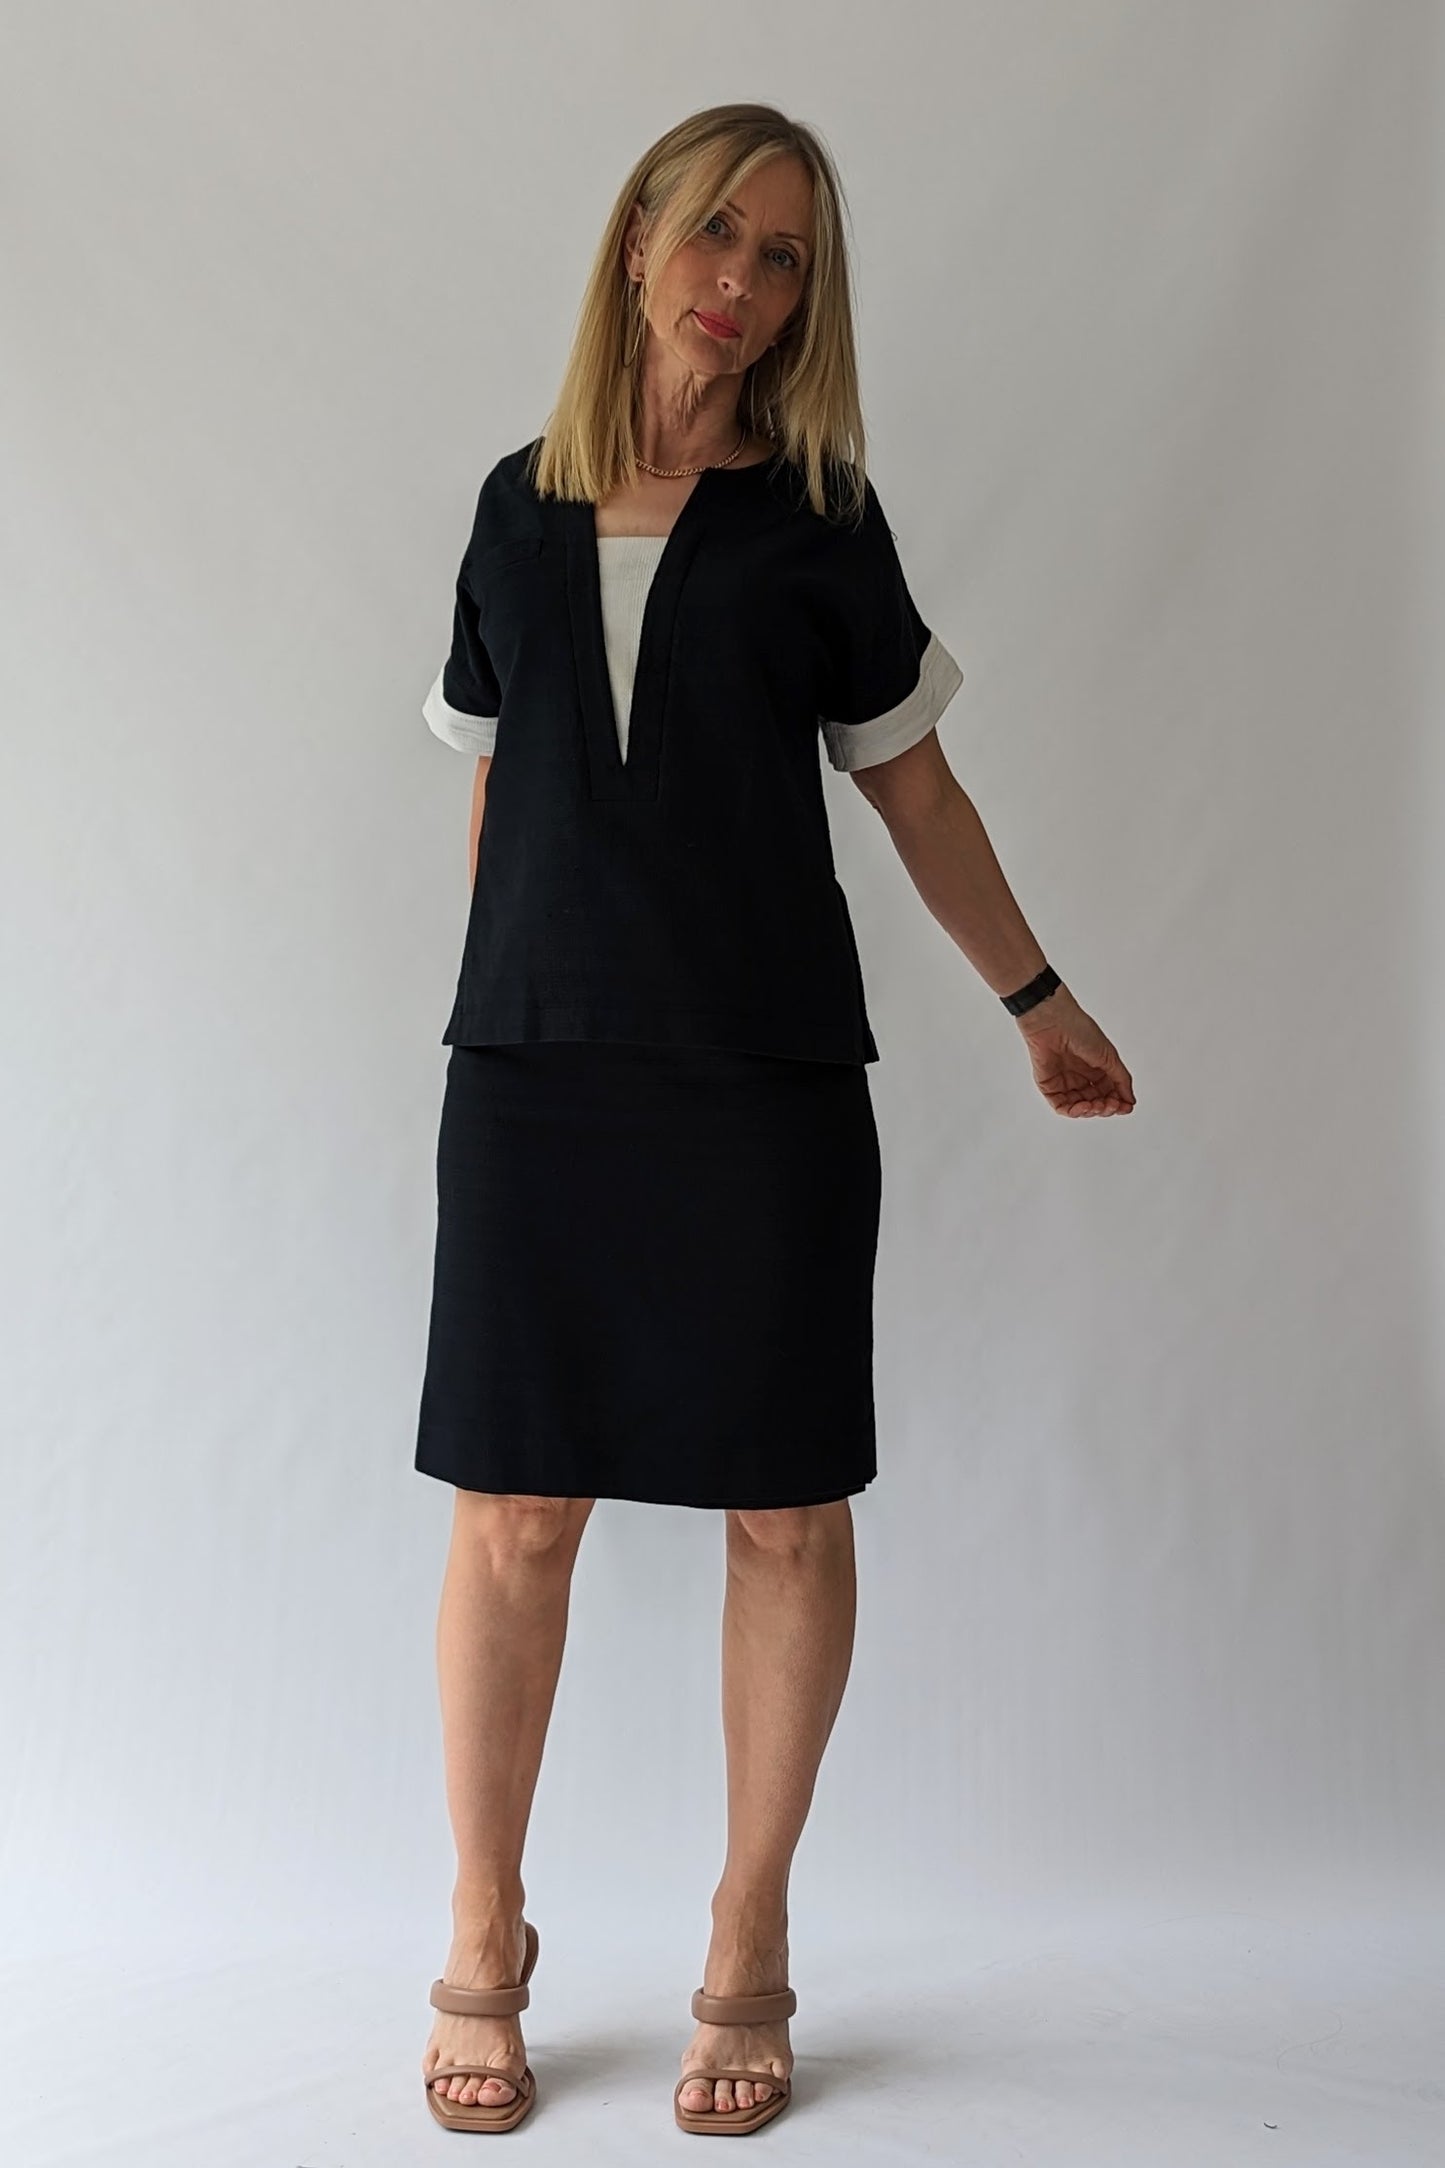 black skirt and top with white trim to sleeves and neck